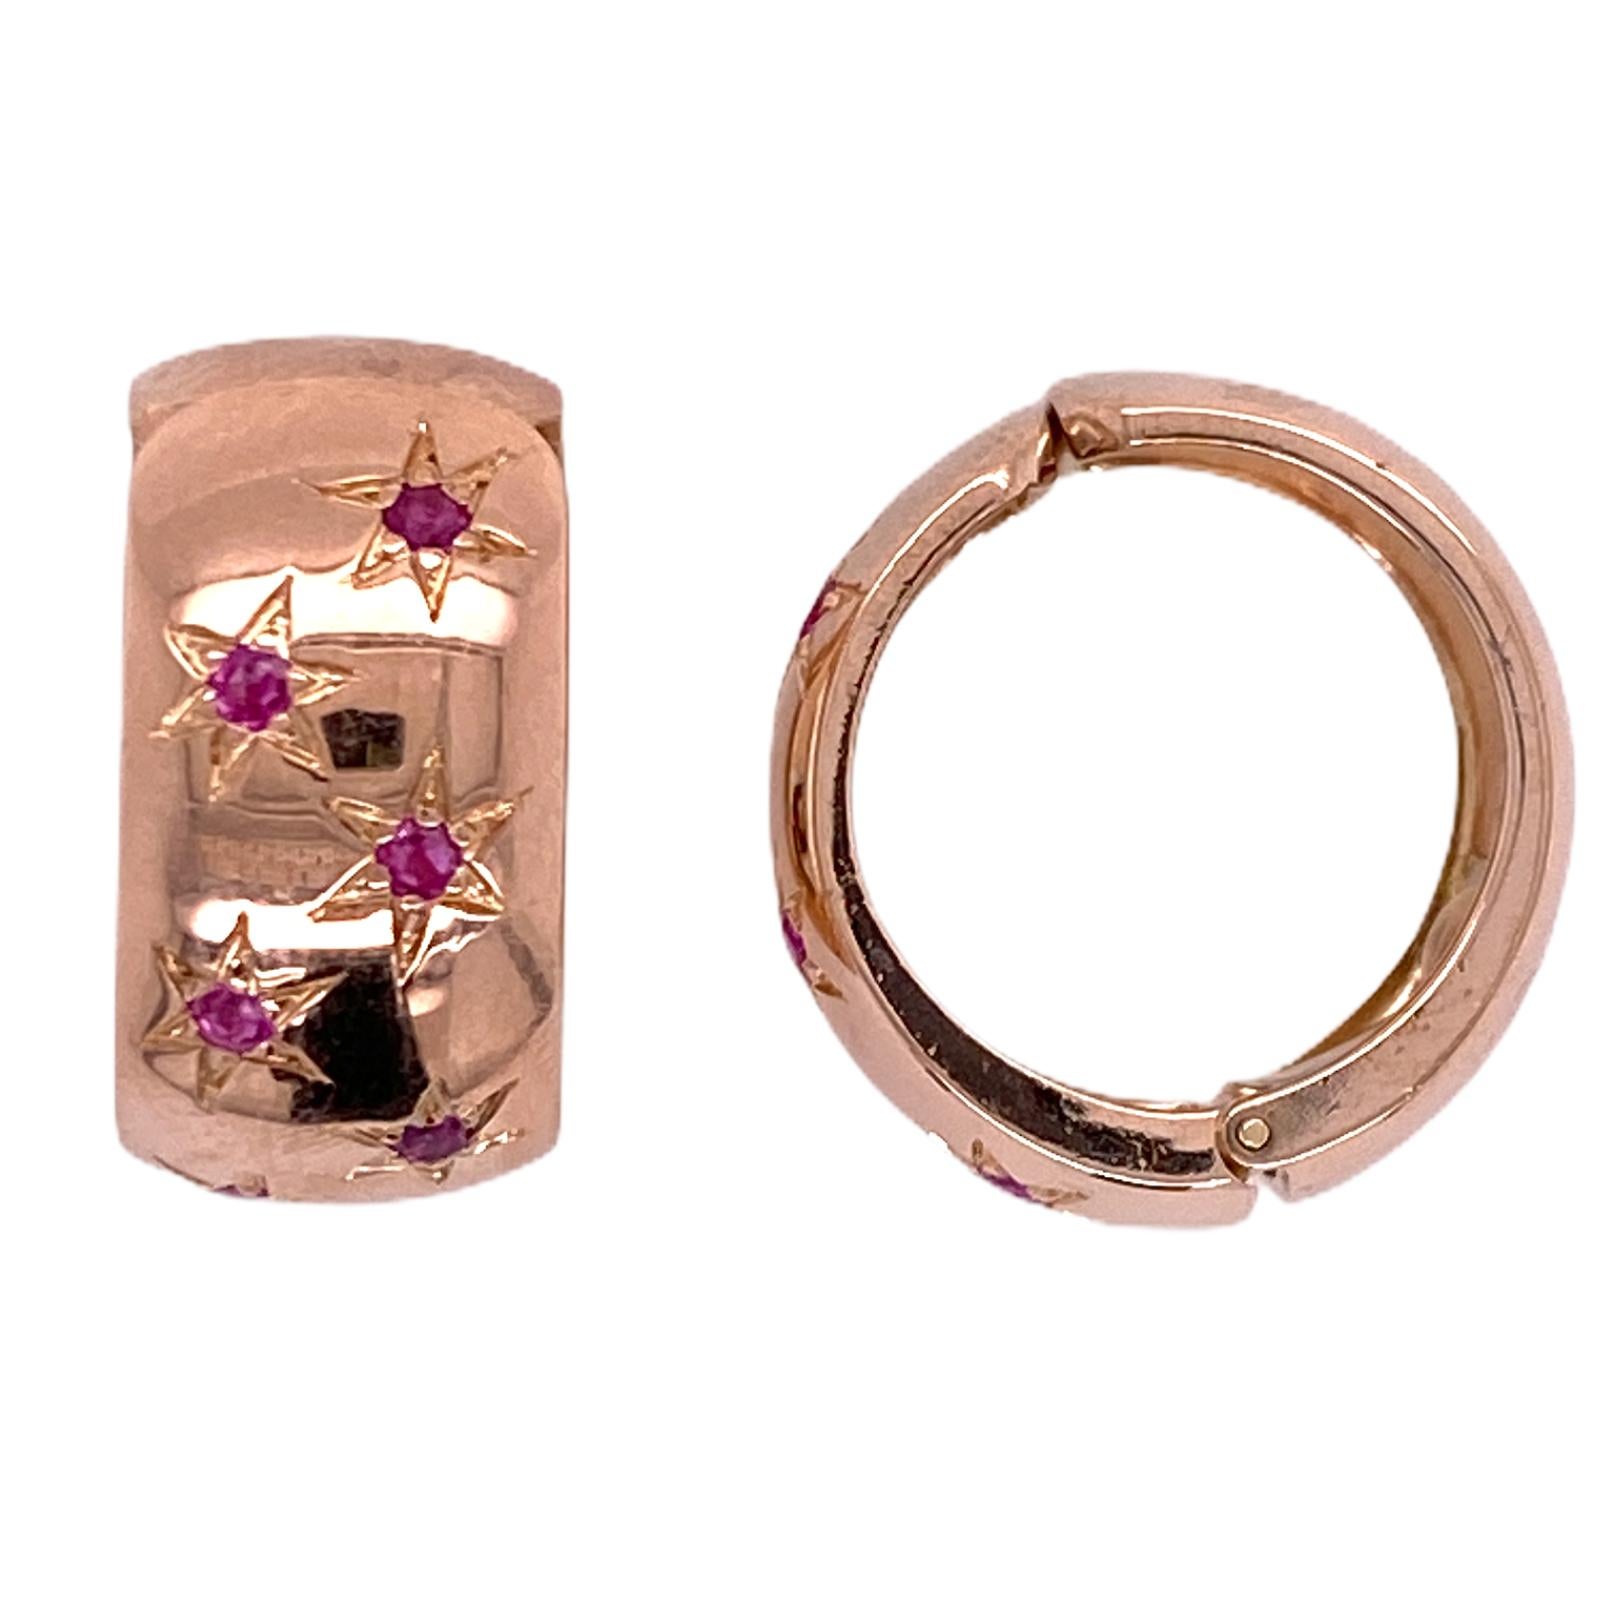 Easy to wear ruby rose gold huggie hoops fashioned in 14 karat rose gold. These comfortable hoops clip onto the ear no post. The earrings are set with ruby gemstones set inside etched stars. The earrings measure 20 x 20 mm. 